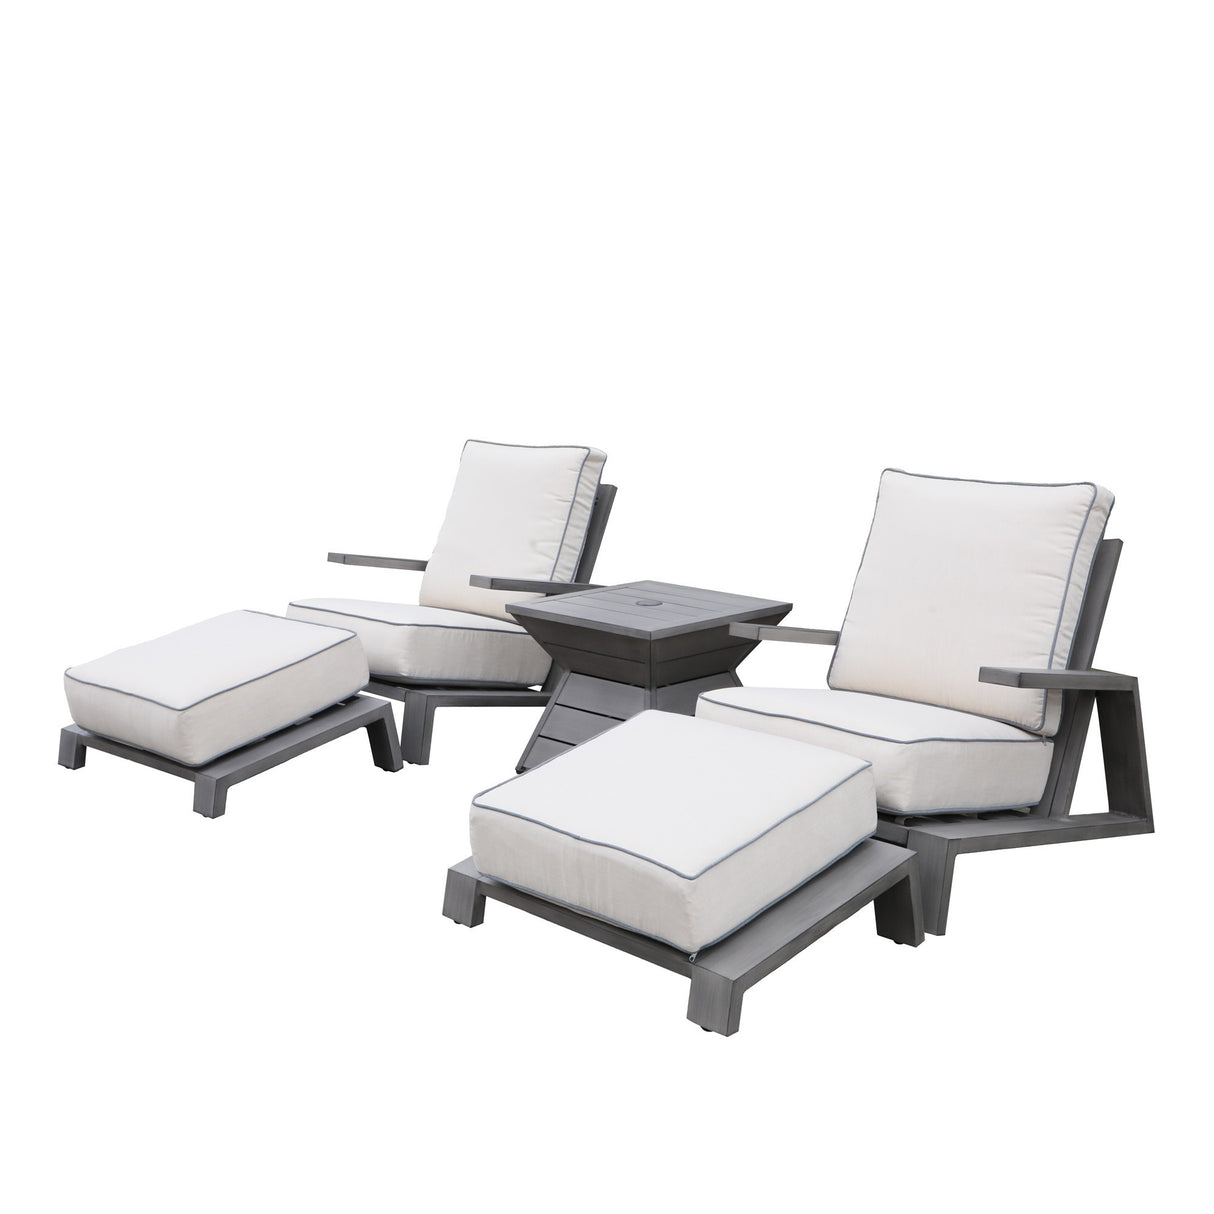 Octavia All-Weather Outdoor, Patio 5-Piece Aluminum Bistro Set with Water-Repellent Cushions for Deck, Backyards, Garden, Lawns, Poolside, and Beach.